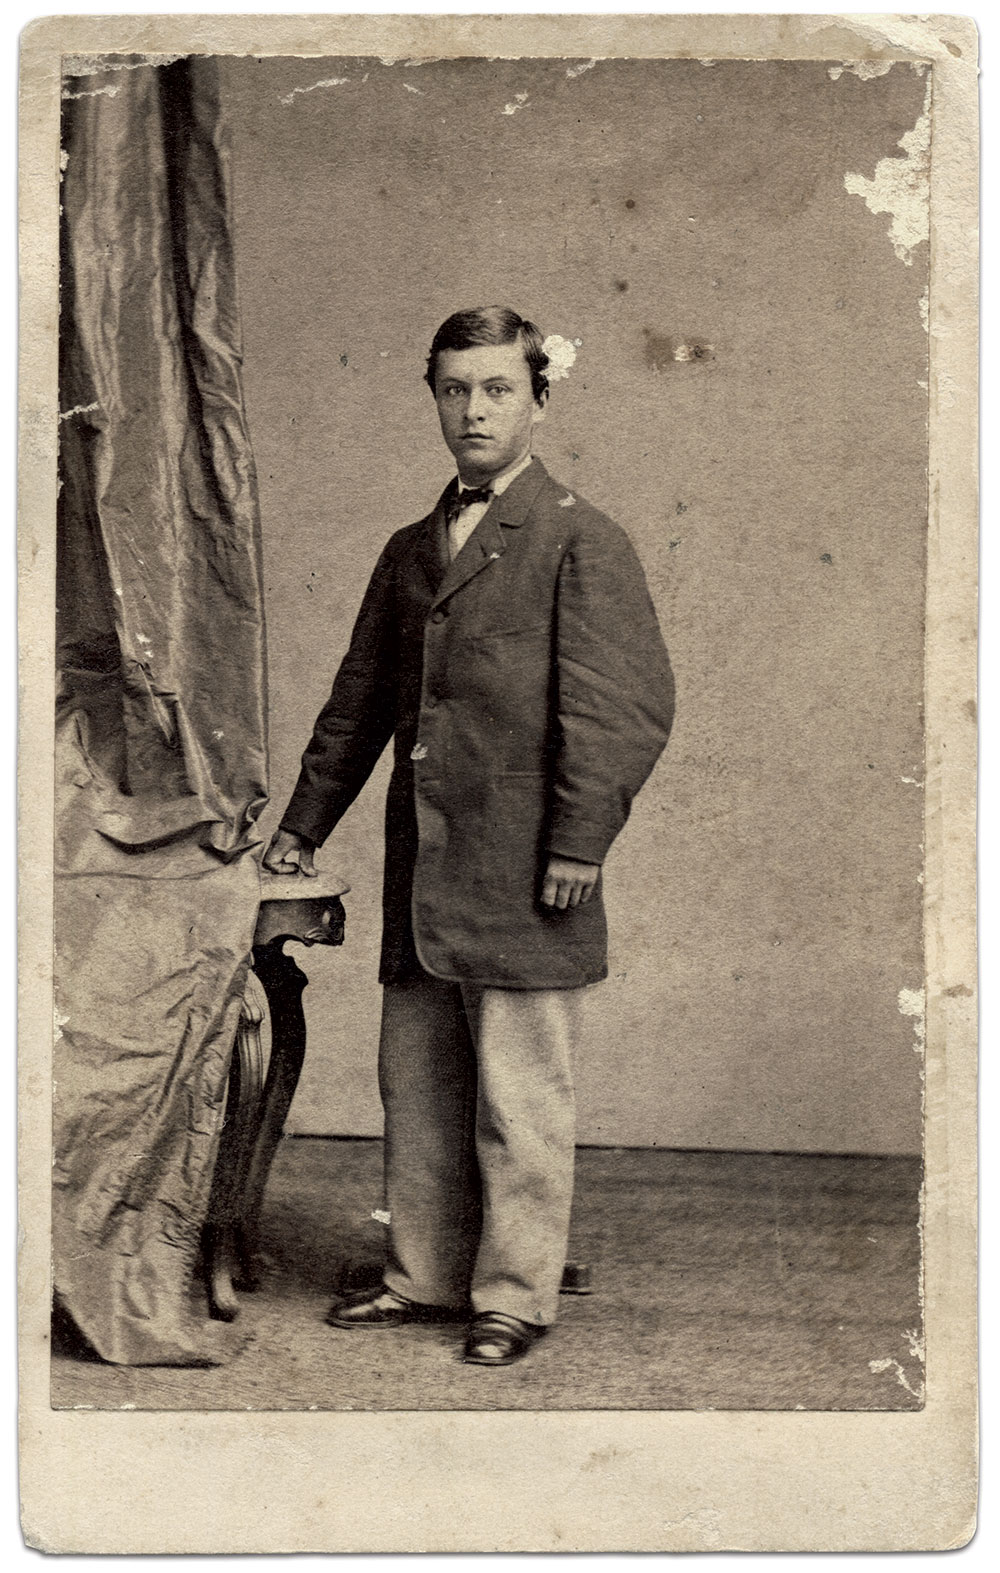 C.A. Homan served in the campaigns around Charleston, S.C. At one time, his office was described as “a cracker box under a tree.” Carte de visite by Wenderoth & Taylor of Philadelphia, Pa. Michael J. McAfee Collection.